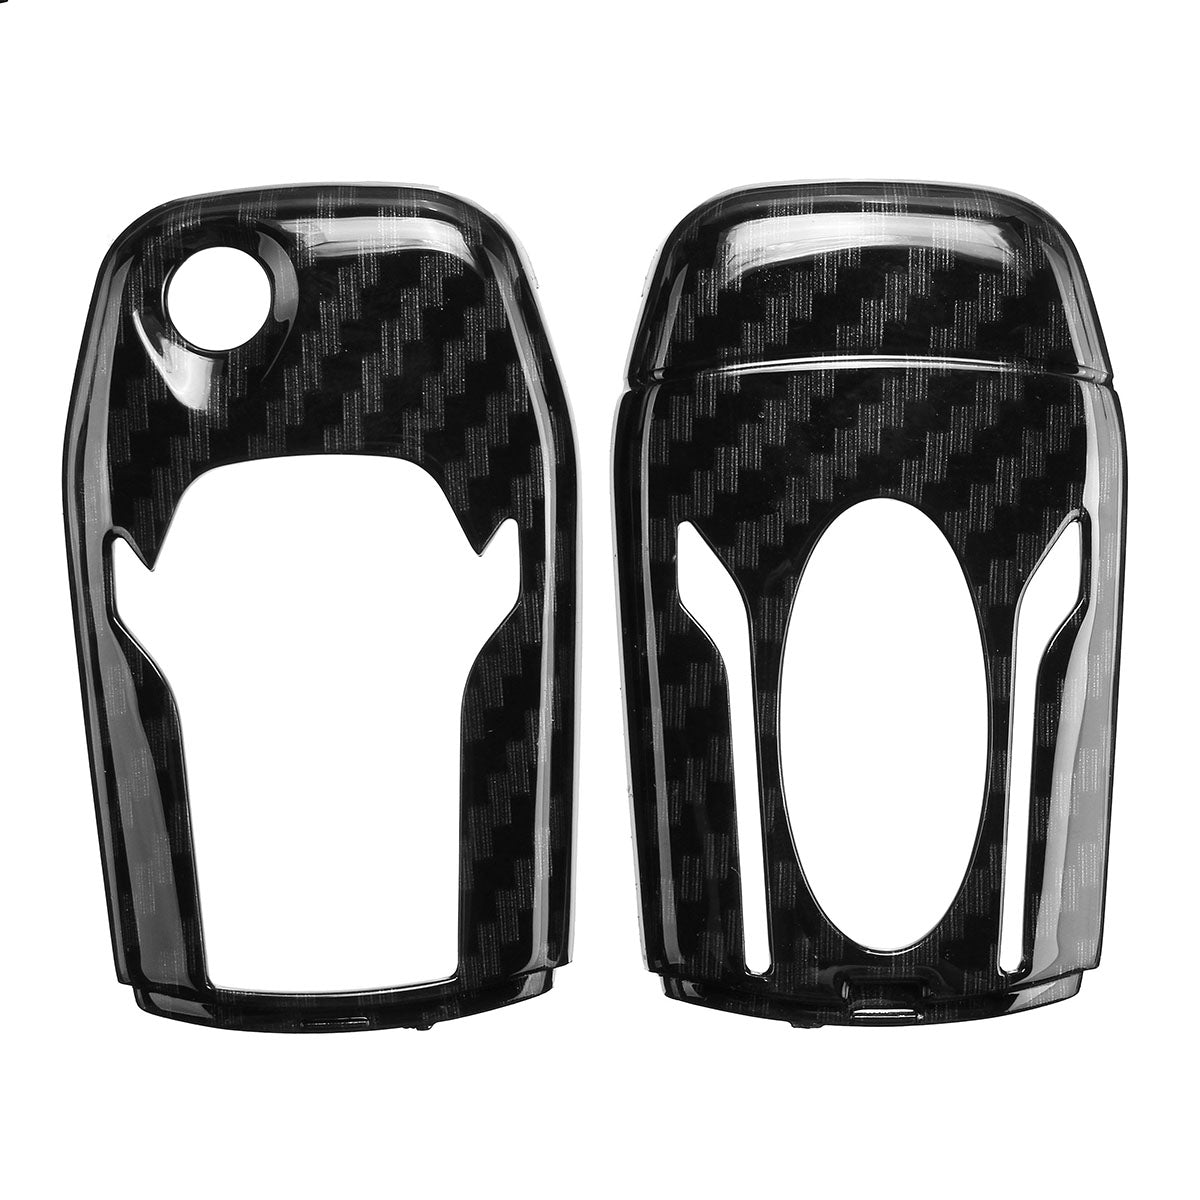 Plastic and Rubber Car Key Case Bag Protector Cover Remote Control Fob for Ford F-150 F-250 F-350 Explorer Ranger - Auto GoShop